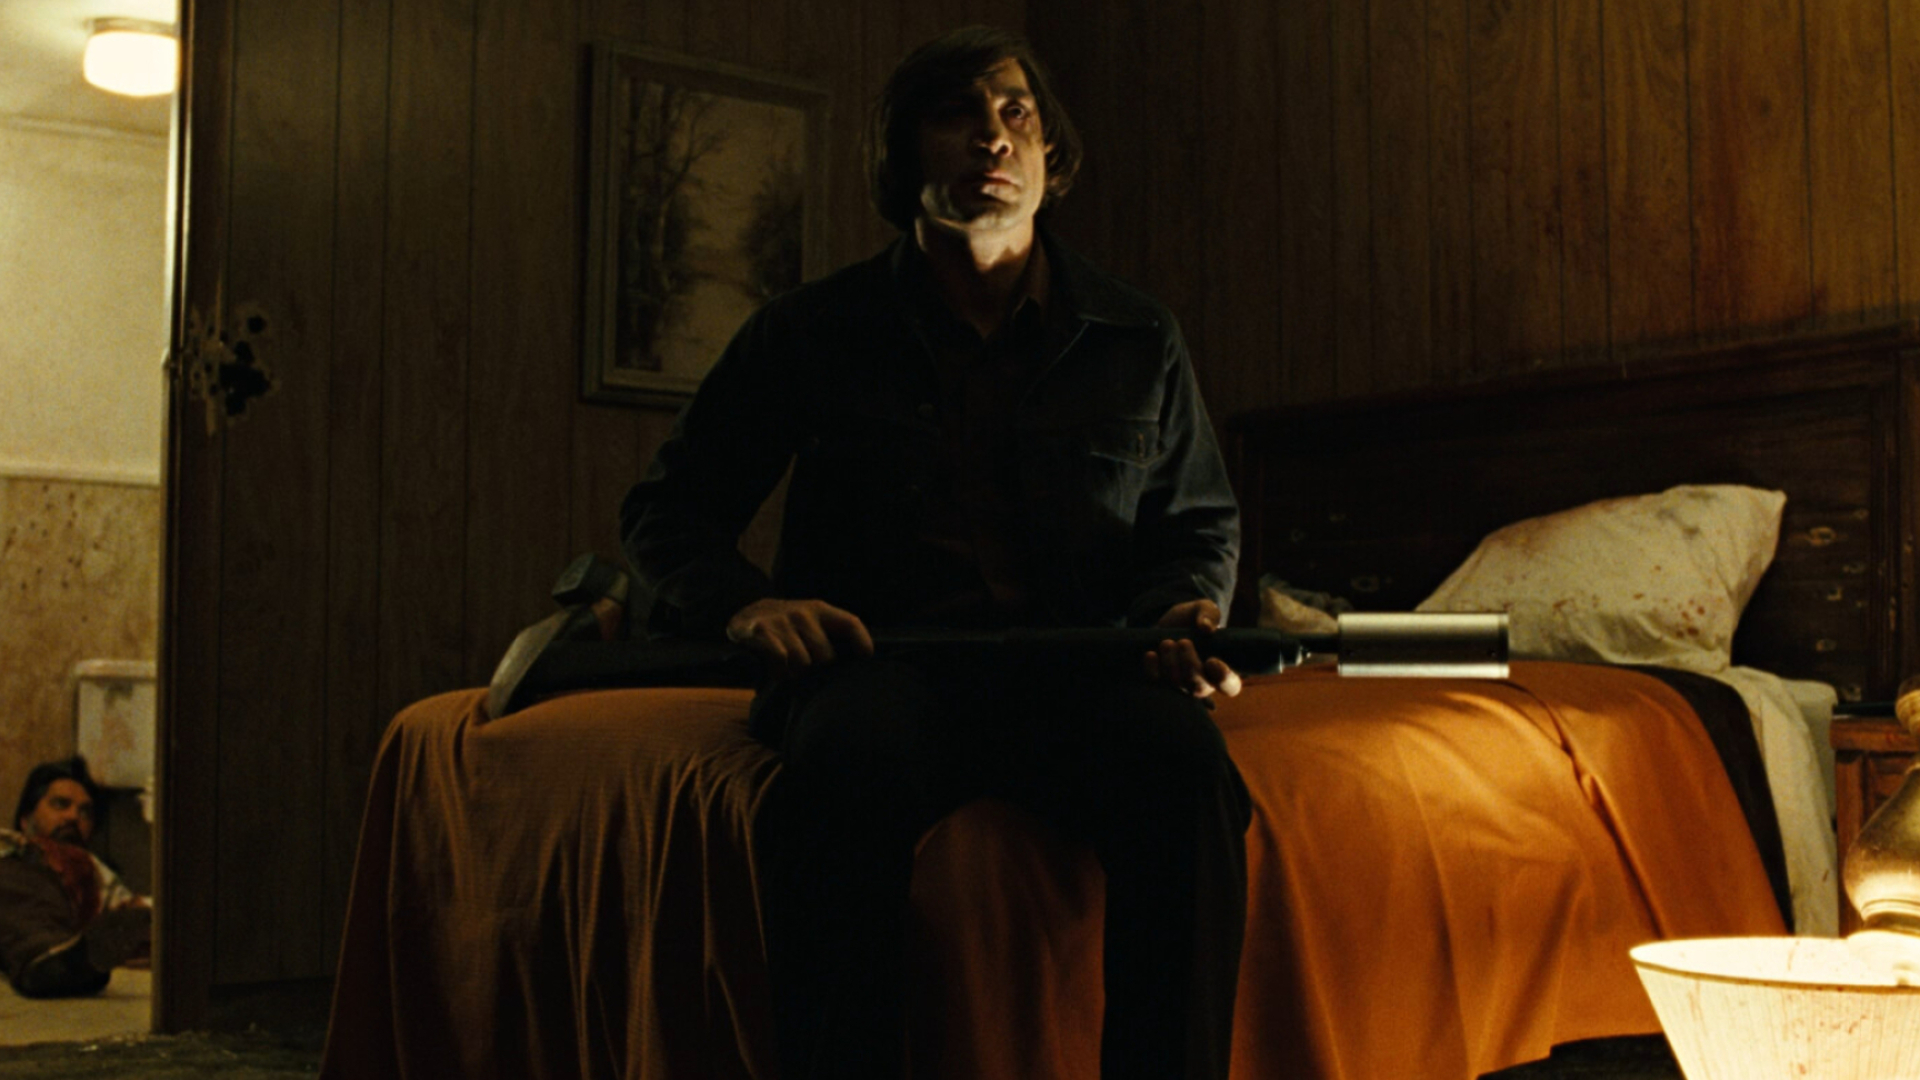 No Country For Old Men (Movie): Anton Chigurh, A 2007 American film written and directed by Joel and Ethan Coen. 1920x1080 Full HD Wallpaper.